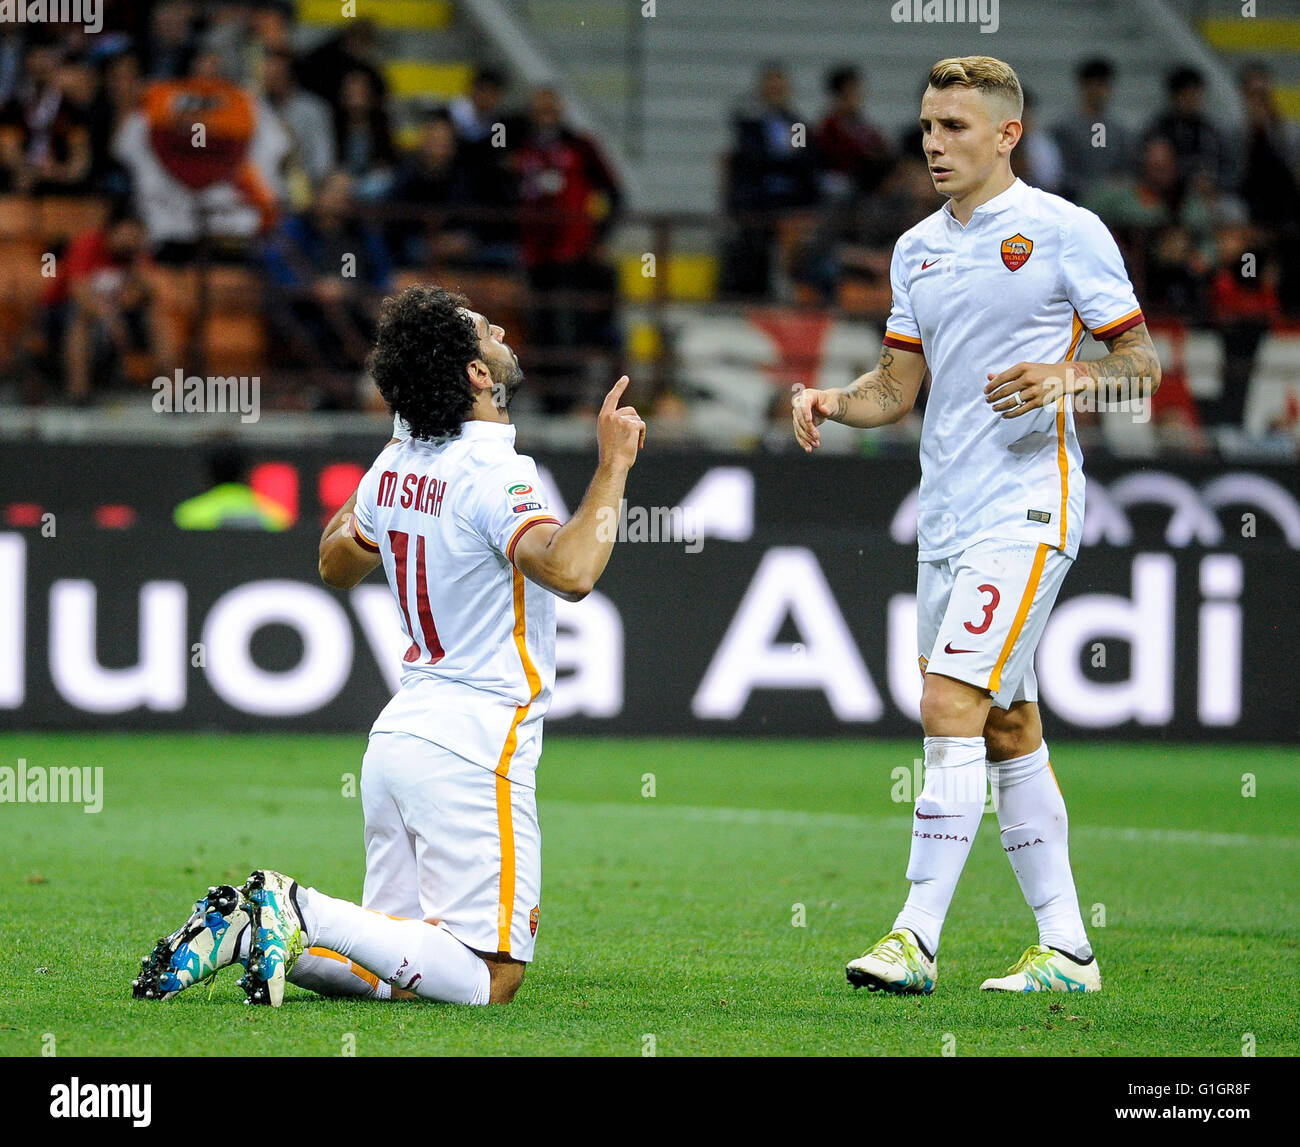 Milan, Italy. 14 may, 2016: Mohamed Salah celebrates after scoring the opening goal during the Serie A football match between AC Milan and AS Roma. Credit:  Nicolò Campo/Alamy Live News Stock Photo